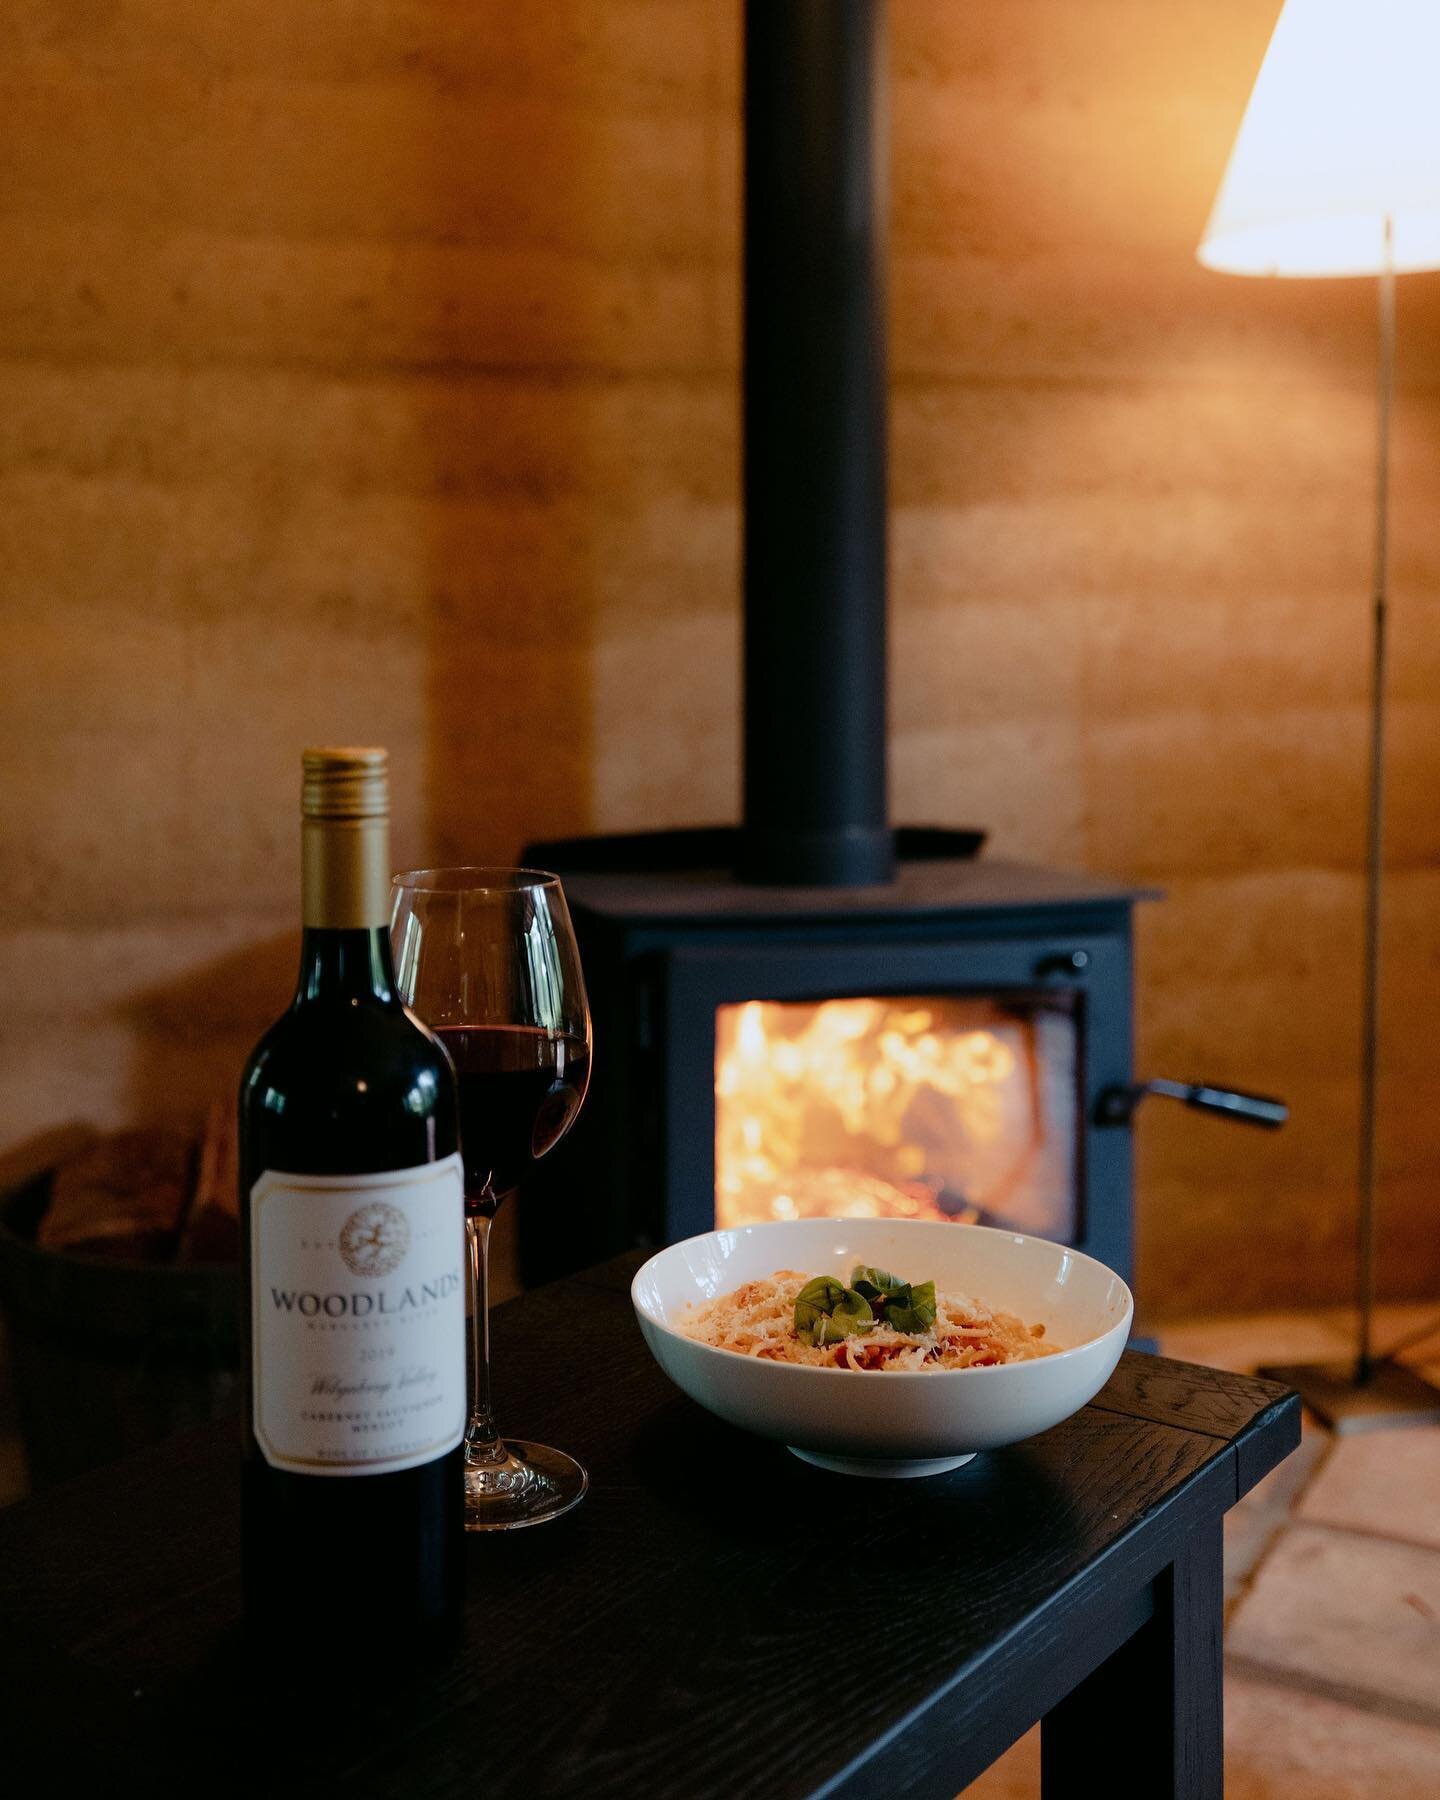 It&rsquo;s almost time to light the fireplace, and we&rsquo;re not sad about it in the slightest 🔥 

Norfolk Street has a down stairs hideaway with a fireplace to cozy up to and enjoy a bottle of red around.

#dunsborough #yallingup #margaretriver #